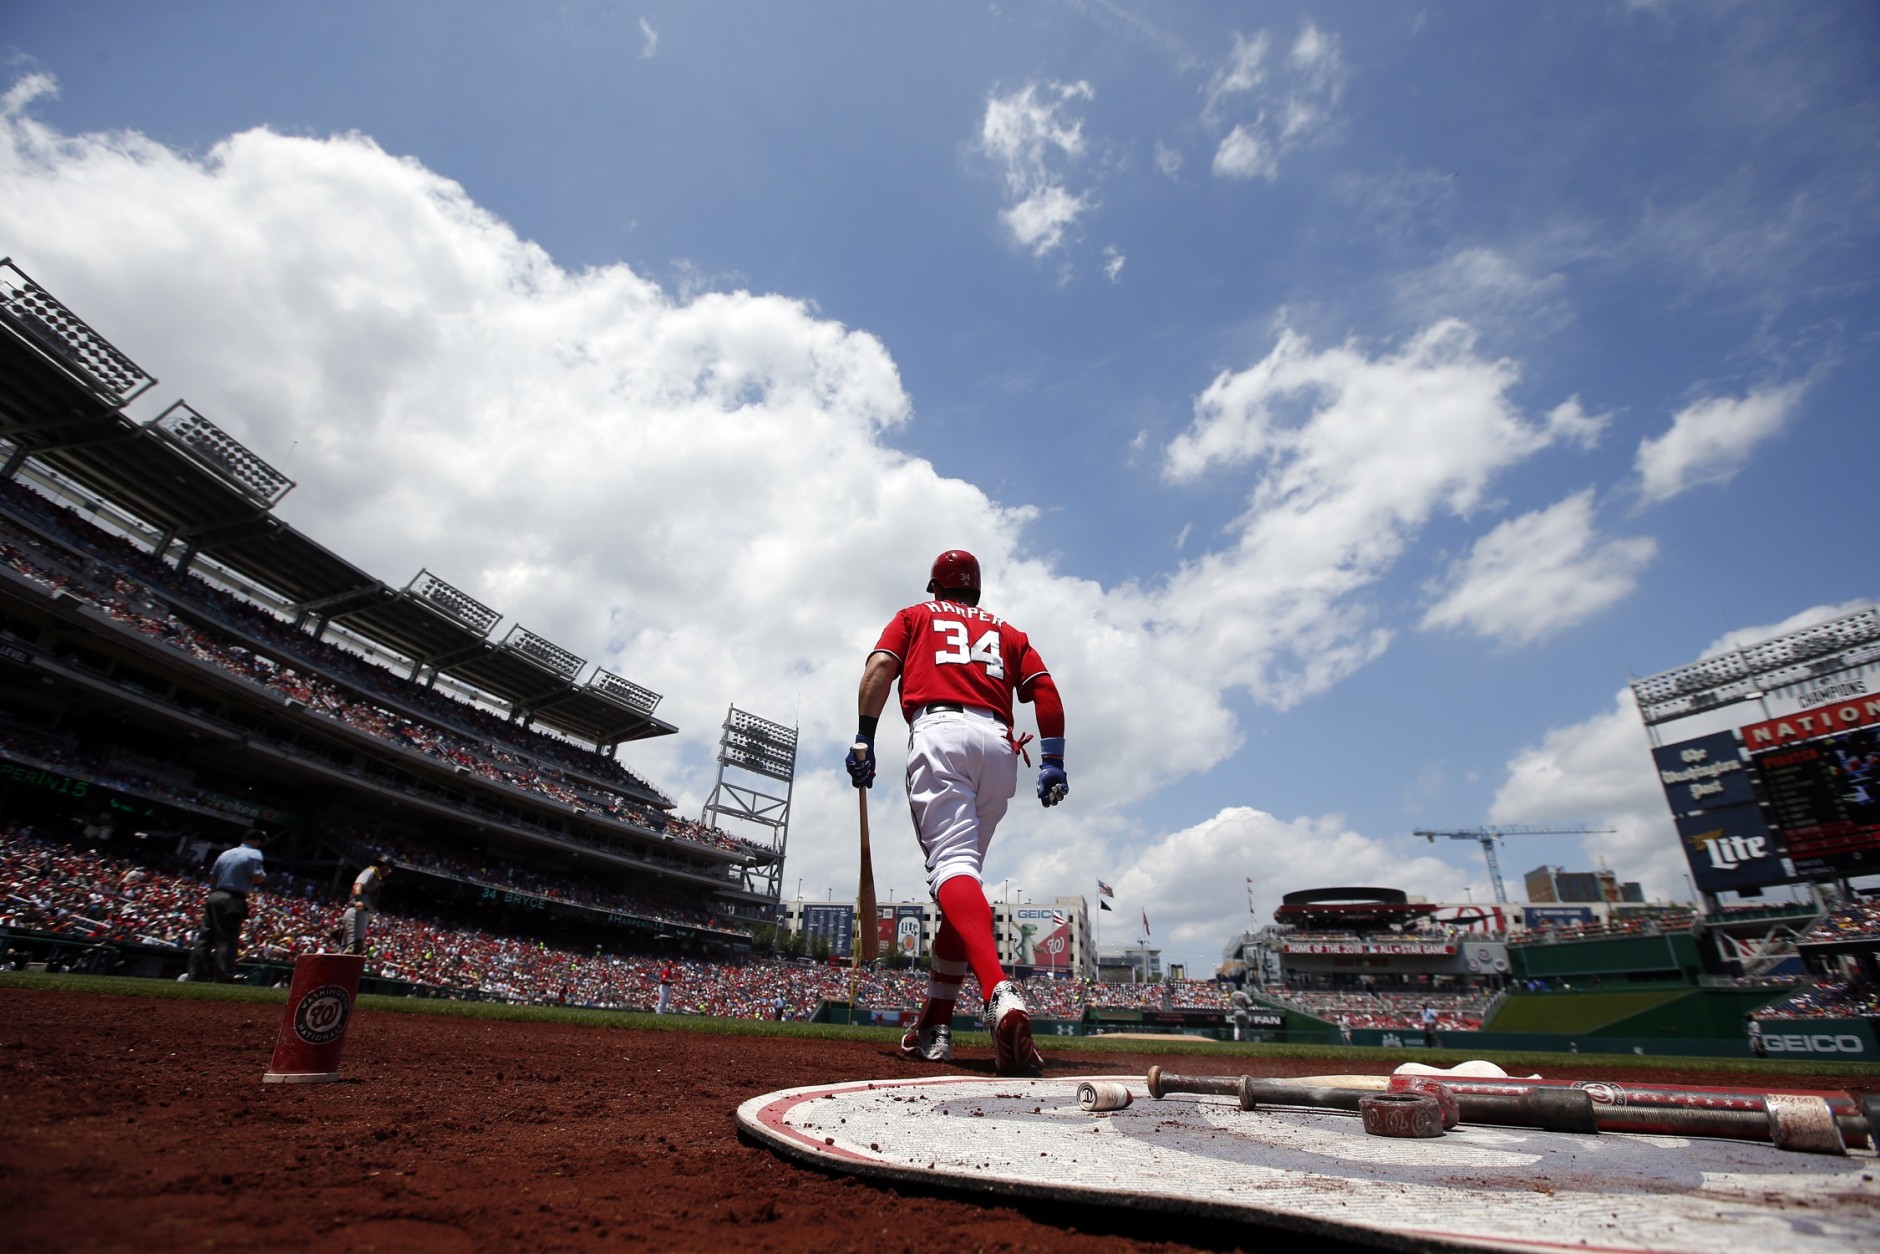 Washington Nationals' Bryce Harper (34) walks to bat during the first inning of a baseball game against the Pittsburgh Pirates at Nationals Park, Sunday, June 21, 2015, in Washington. (AP Photo/Alex Brandon)